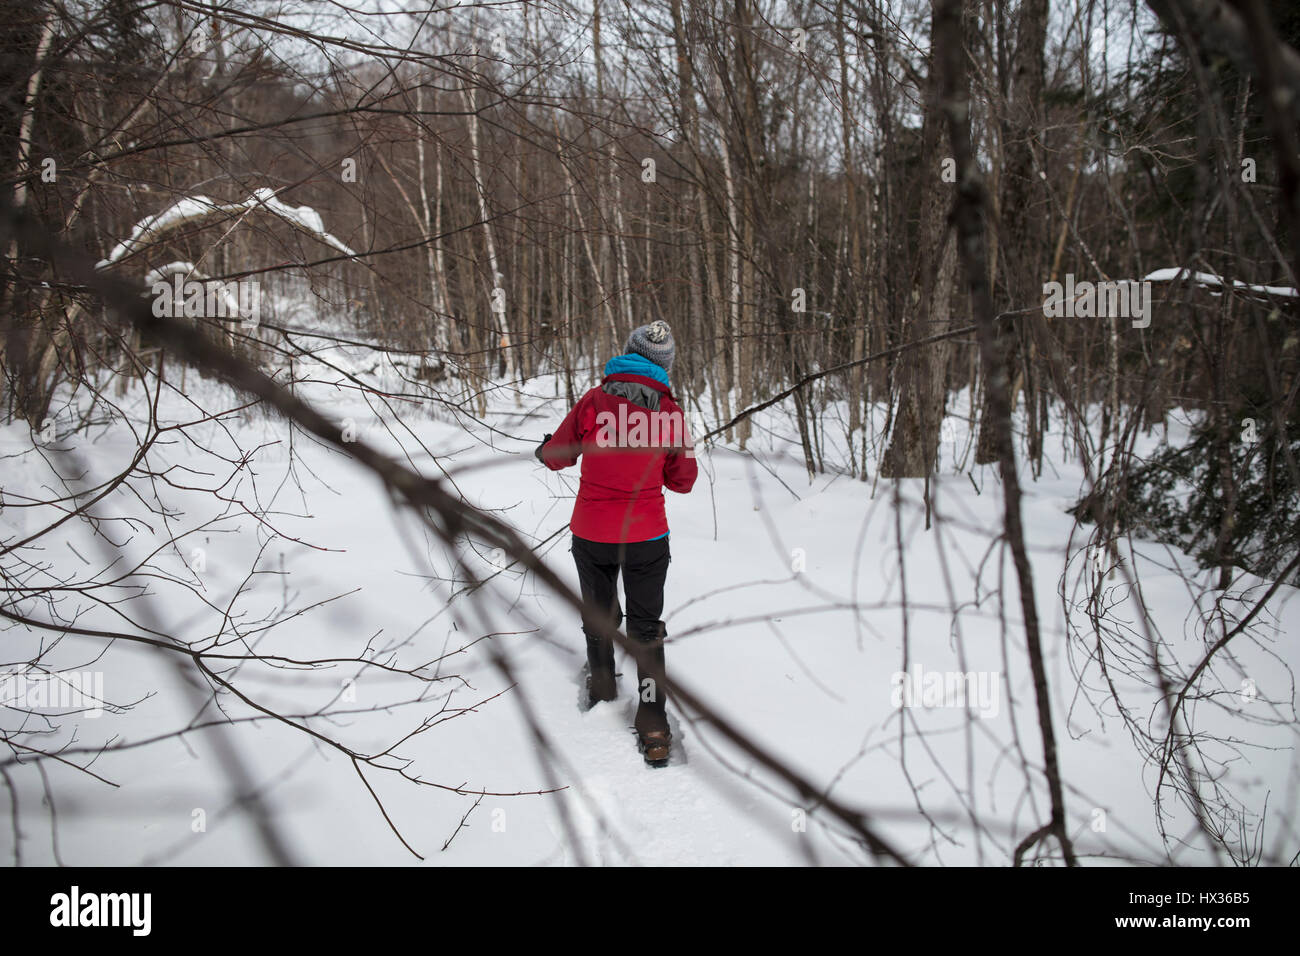 A lady in a red jacket snowshoes in the forest after a snow storm in Hastings Highlands, Ontario, Canada. Stock Photo